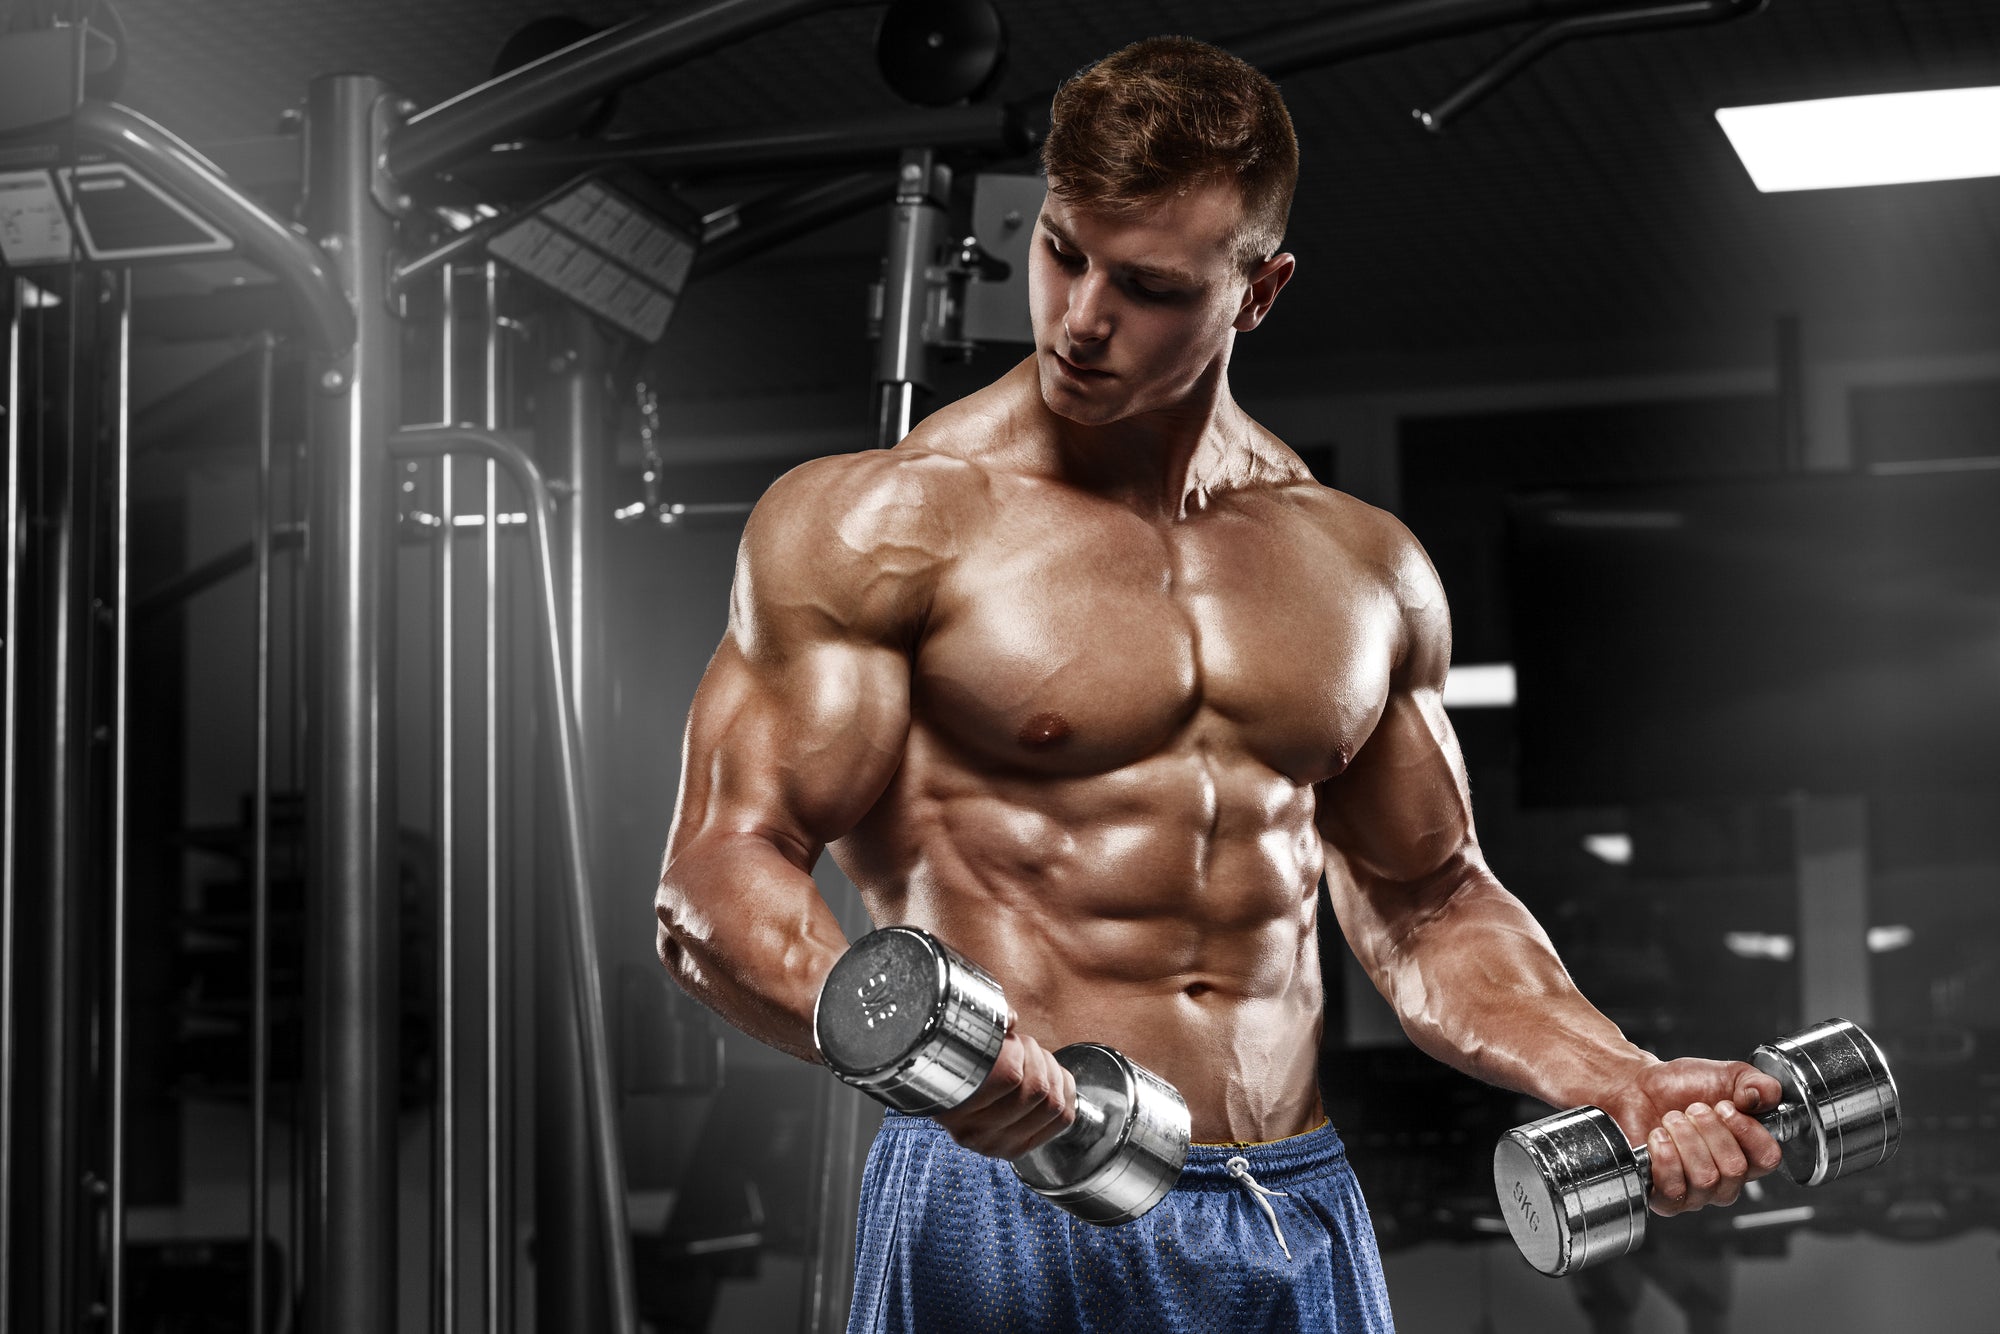 Dumbbell Workout Plan: The 19 Best Exercises